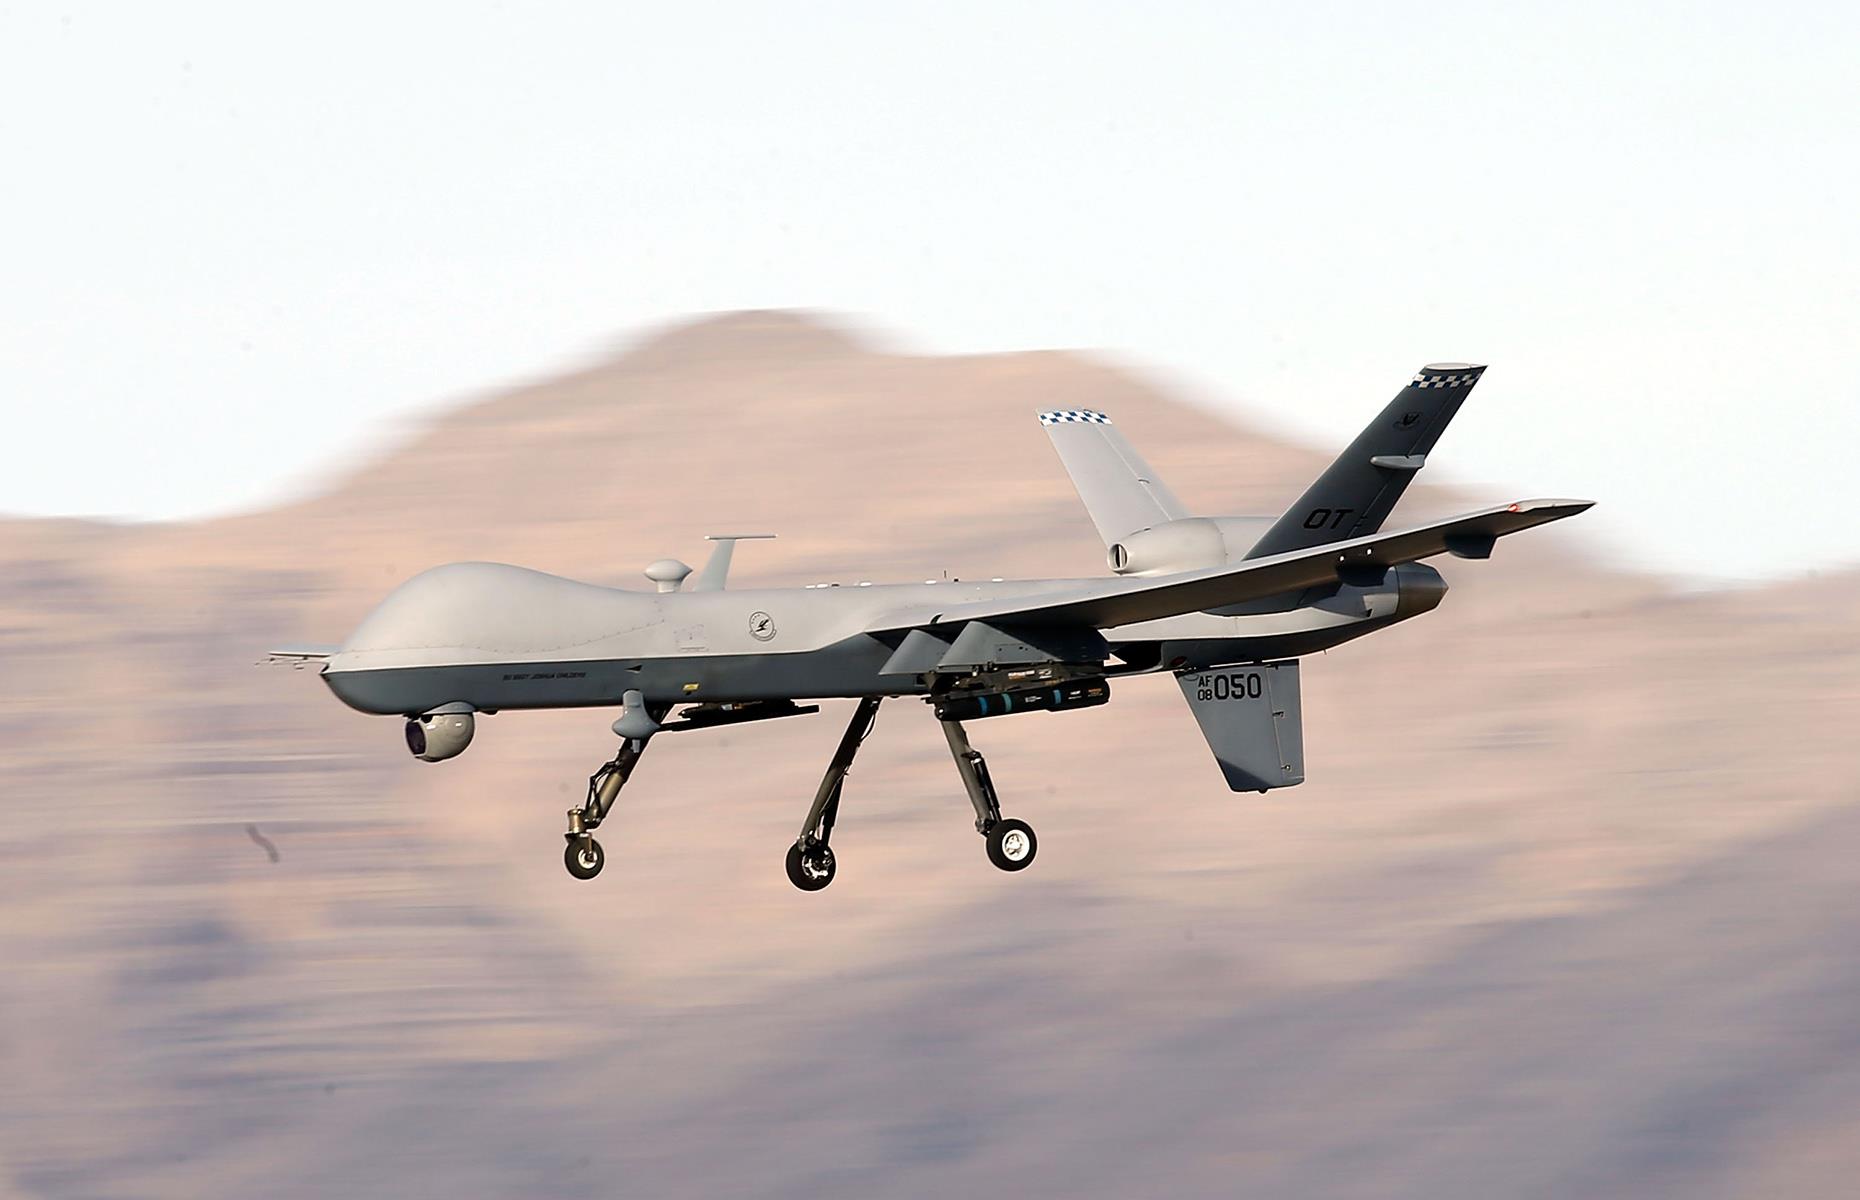 <p>Weaponized drones have taken the place of hundreds of soldiers in combat situations. The US Army, for example, has used the technology extensively, and drones have been frequently used during the war in Ukraine.</p>  <p>According to General Robert Core, as much as a quarter of US combat soldiers could be replaced by robots by 2030, saving many American lives on the battlefield.</p>